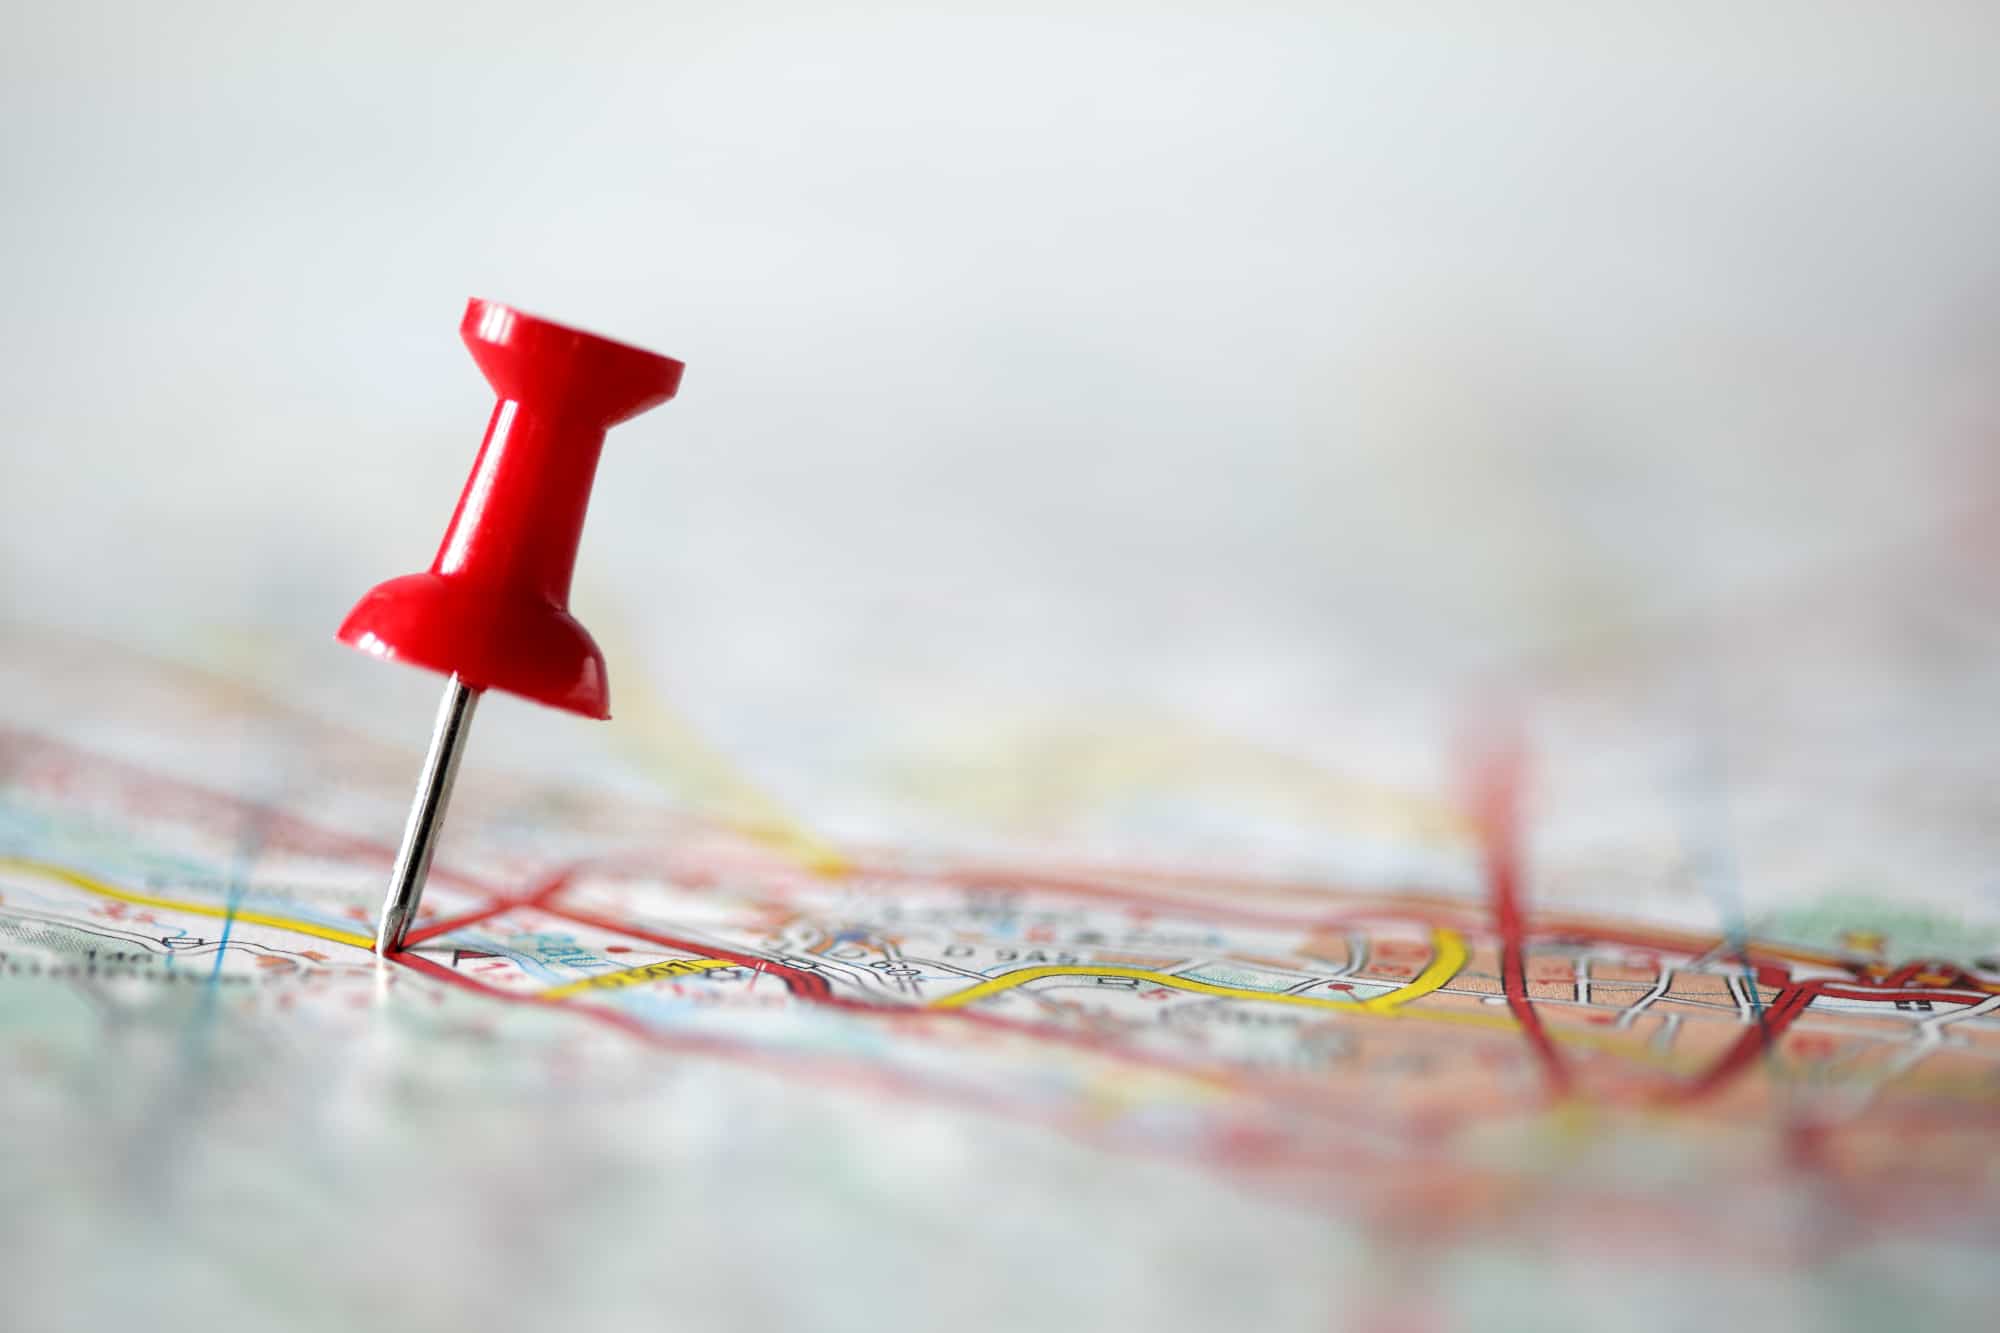 Red pushpin showing the location of a destination point on a map for naming a business